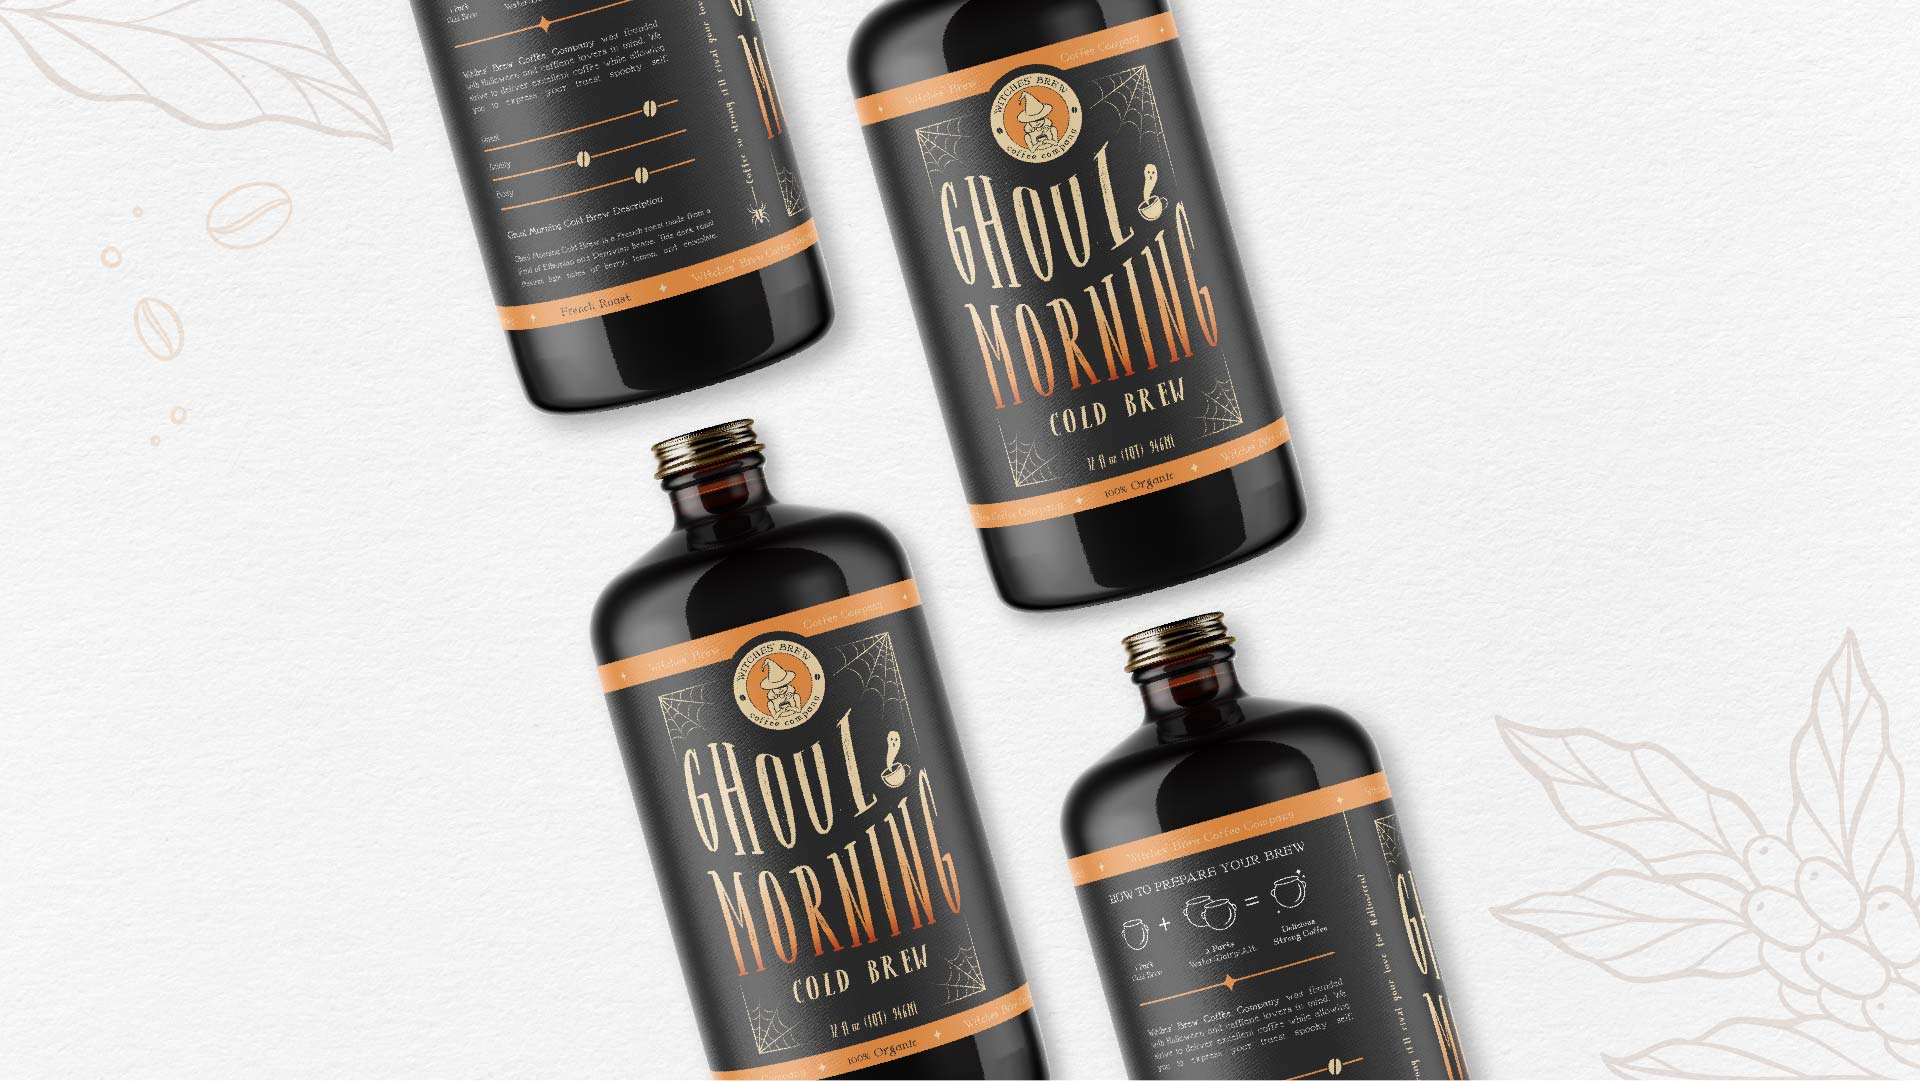 "Ghoul Morning Cold Brew." / "Ghoul Morning Cold Brew." Cold Brew label 9x4 inches, print 2021. Product design for Witches’ Brew Coffee Co. The brand’s inspiration came from a love of Halloween and illustrative designs.